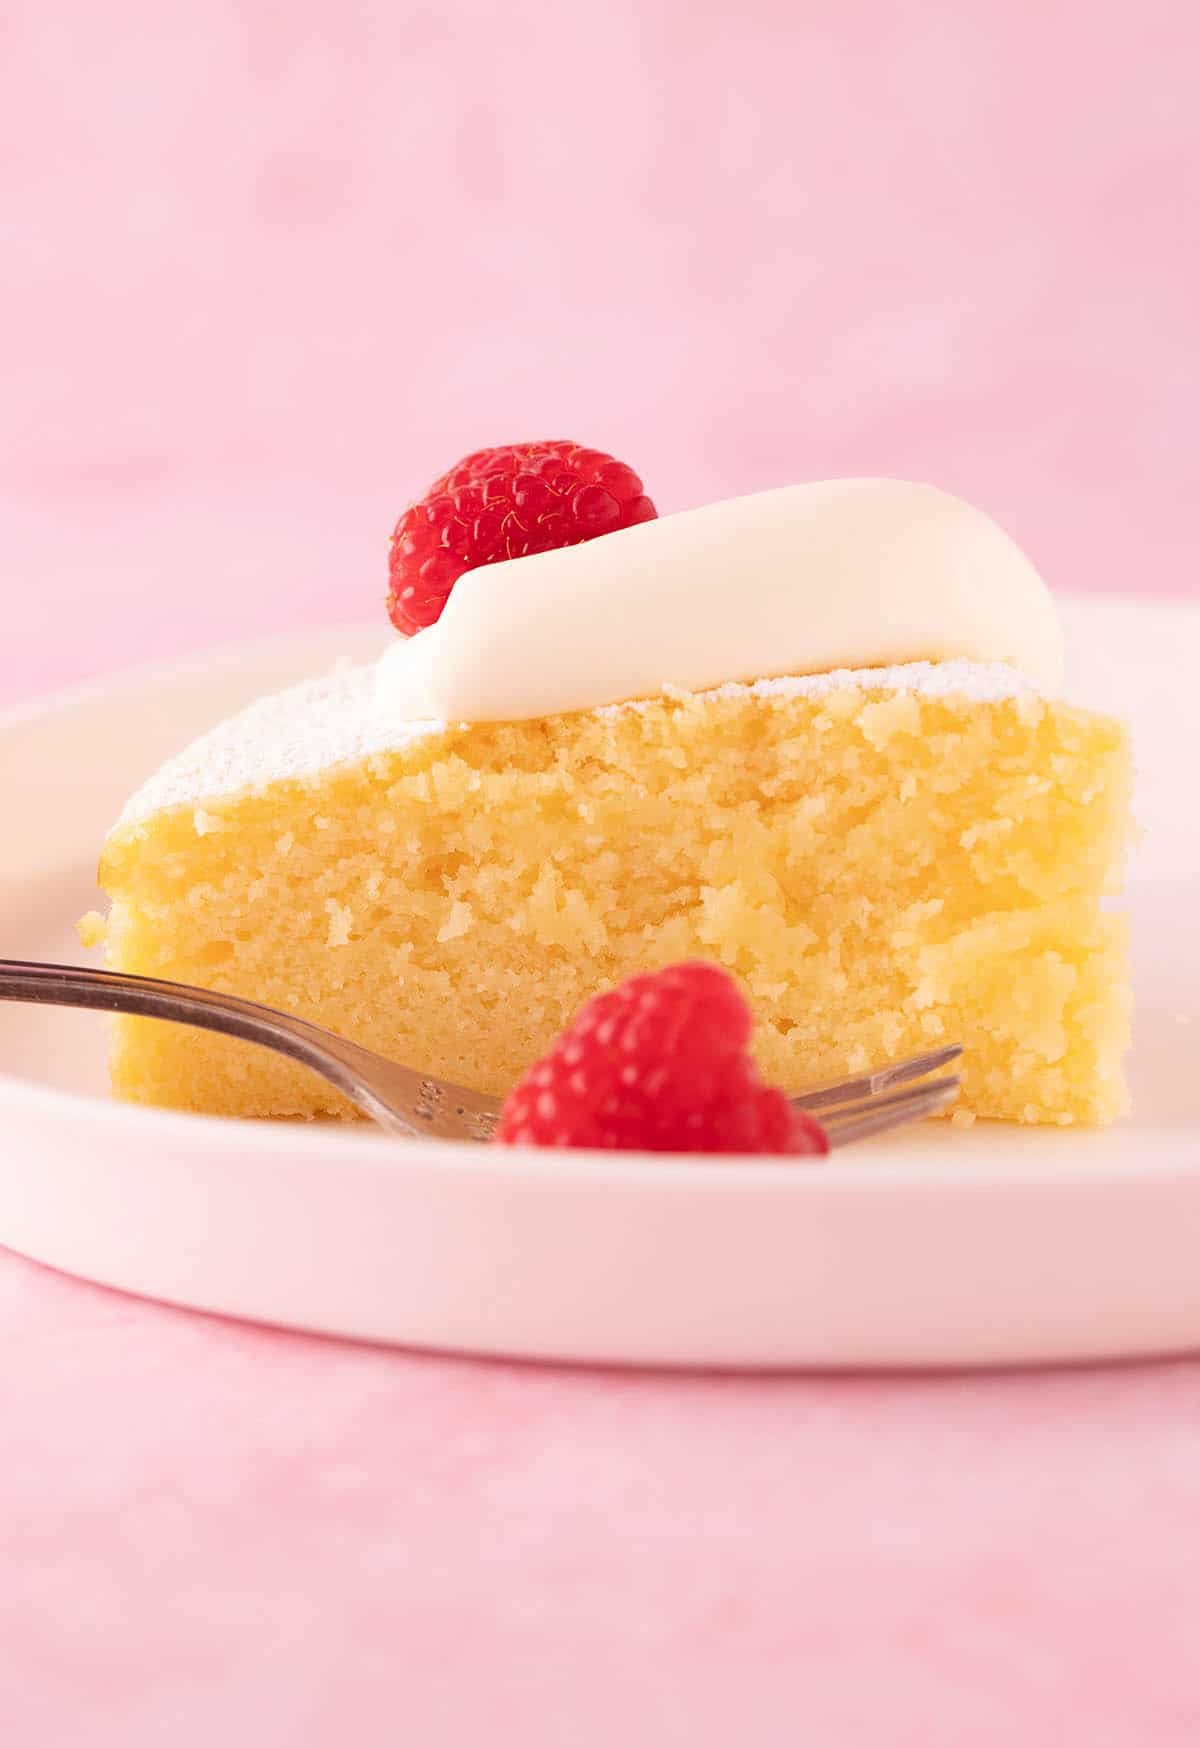 A beautiful pieces of Lemon Ricotta Cake served with fresh raspberries.